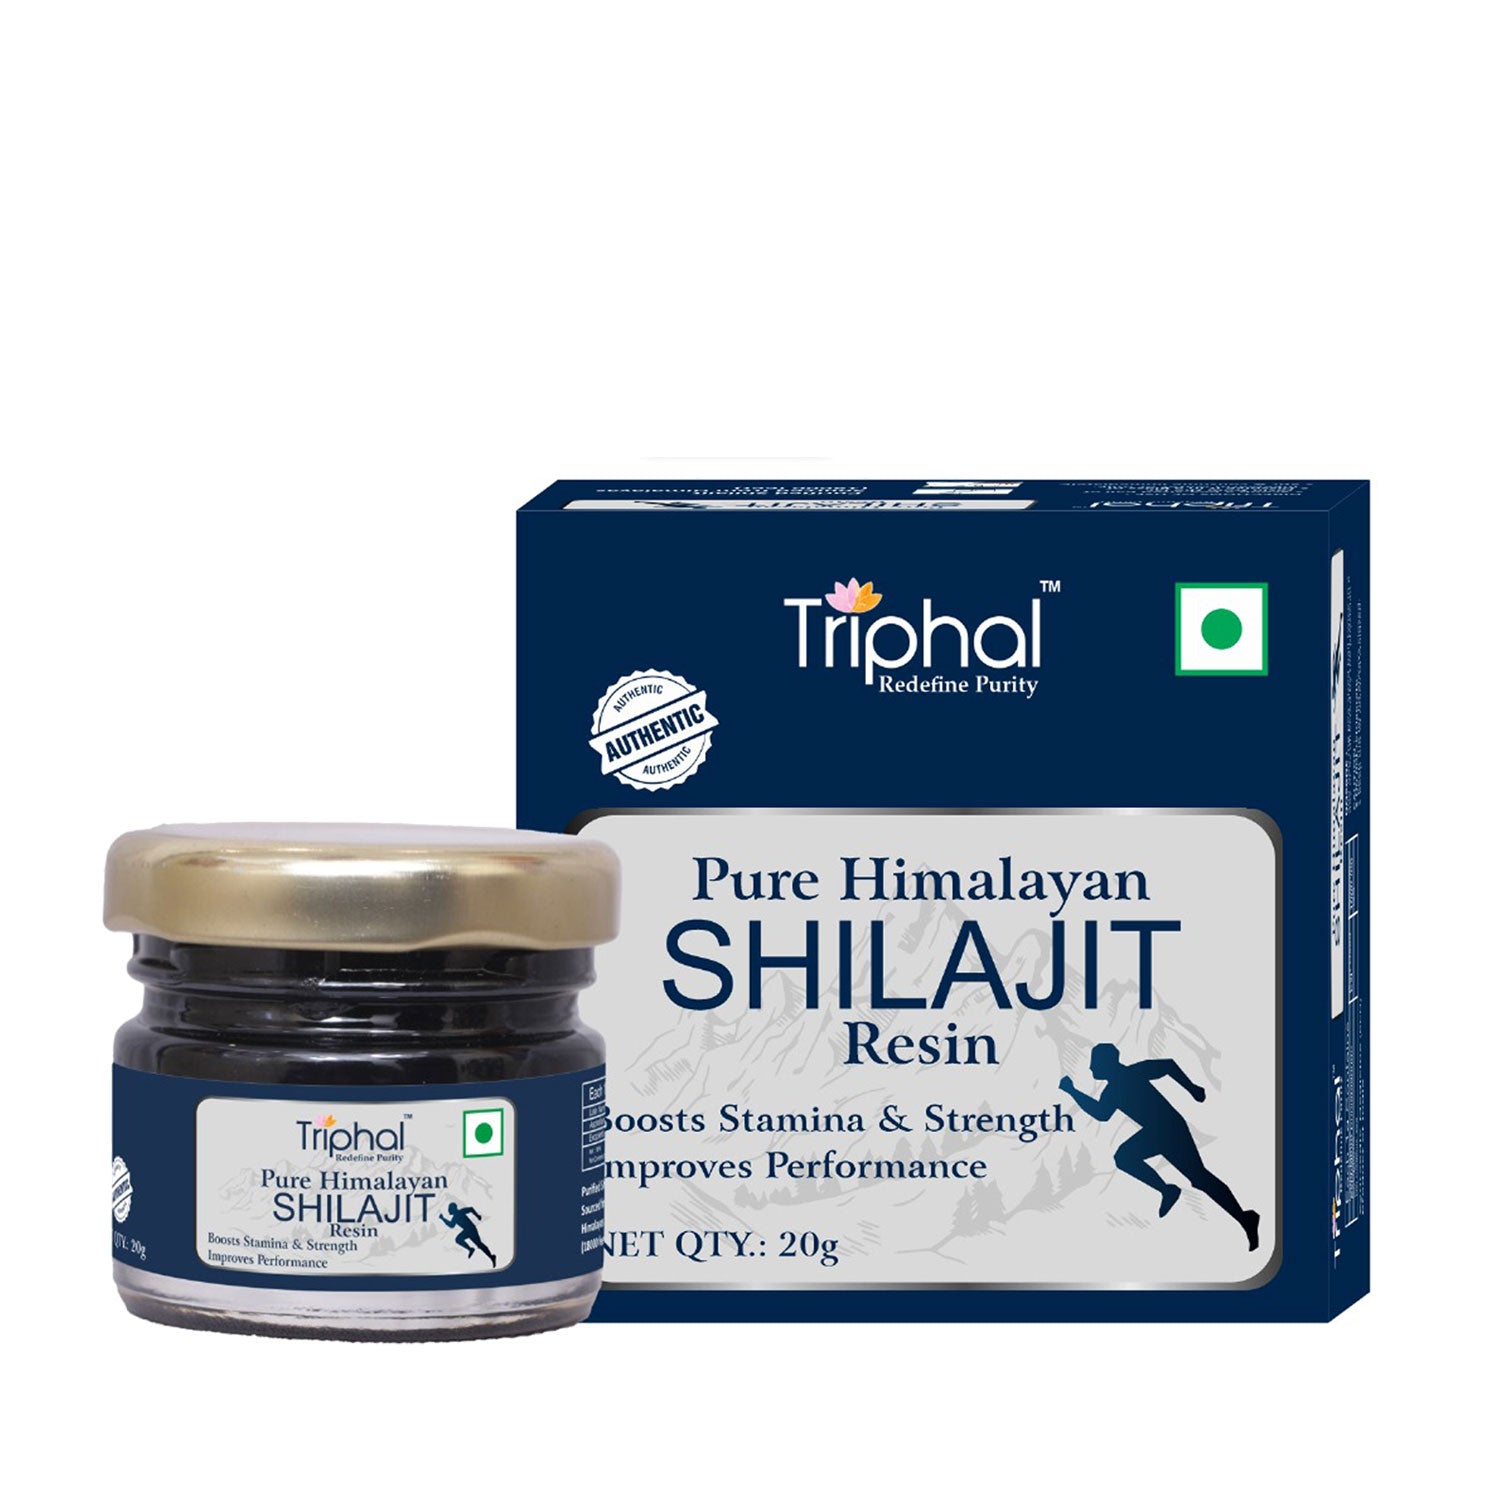 Triphal Pure  Himalayan Shilajit Resin Box with Jar and Golden Spoon 20g Pack